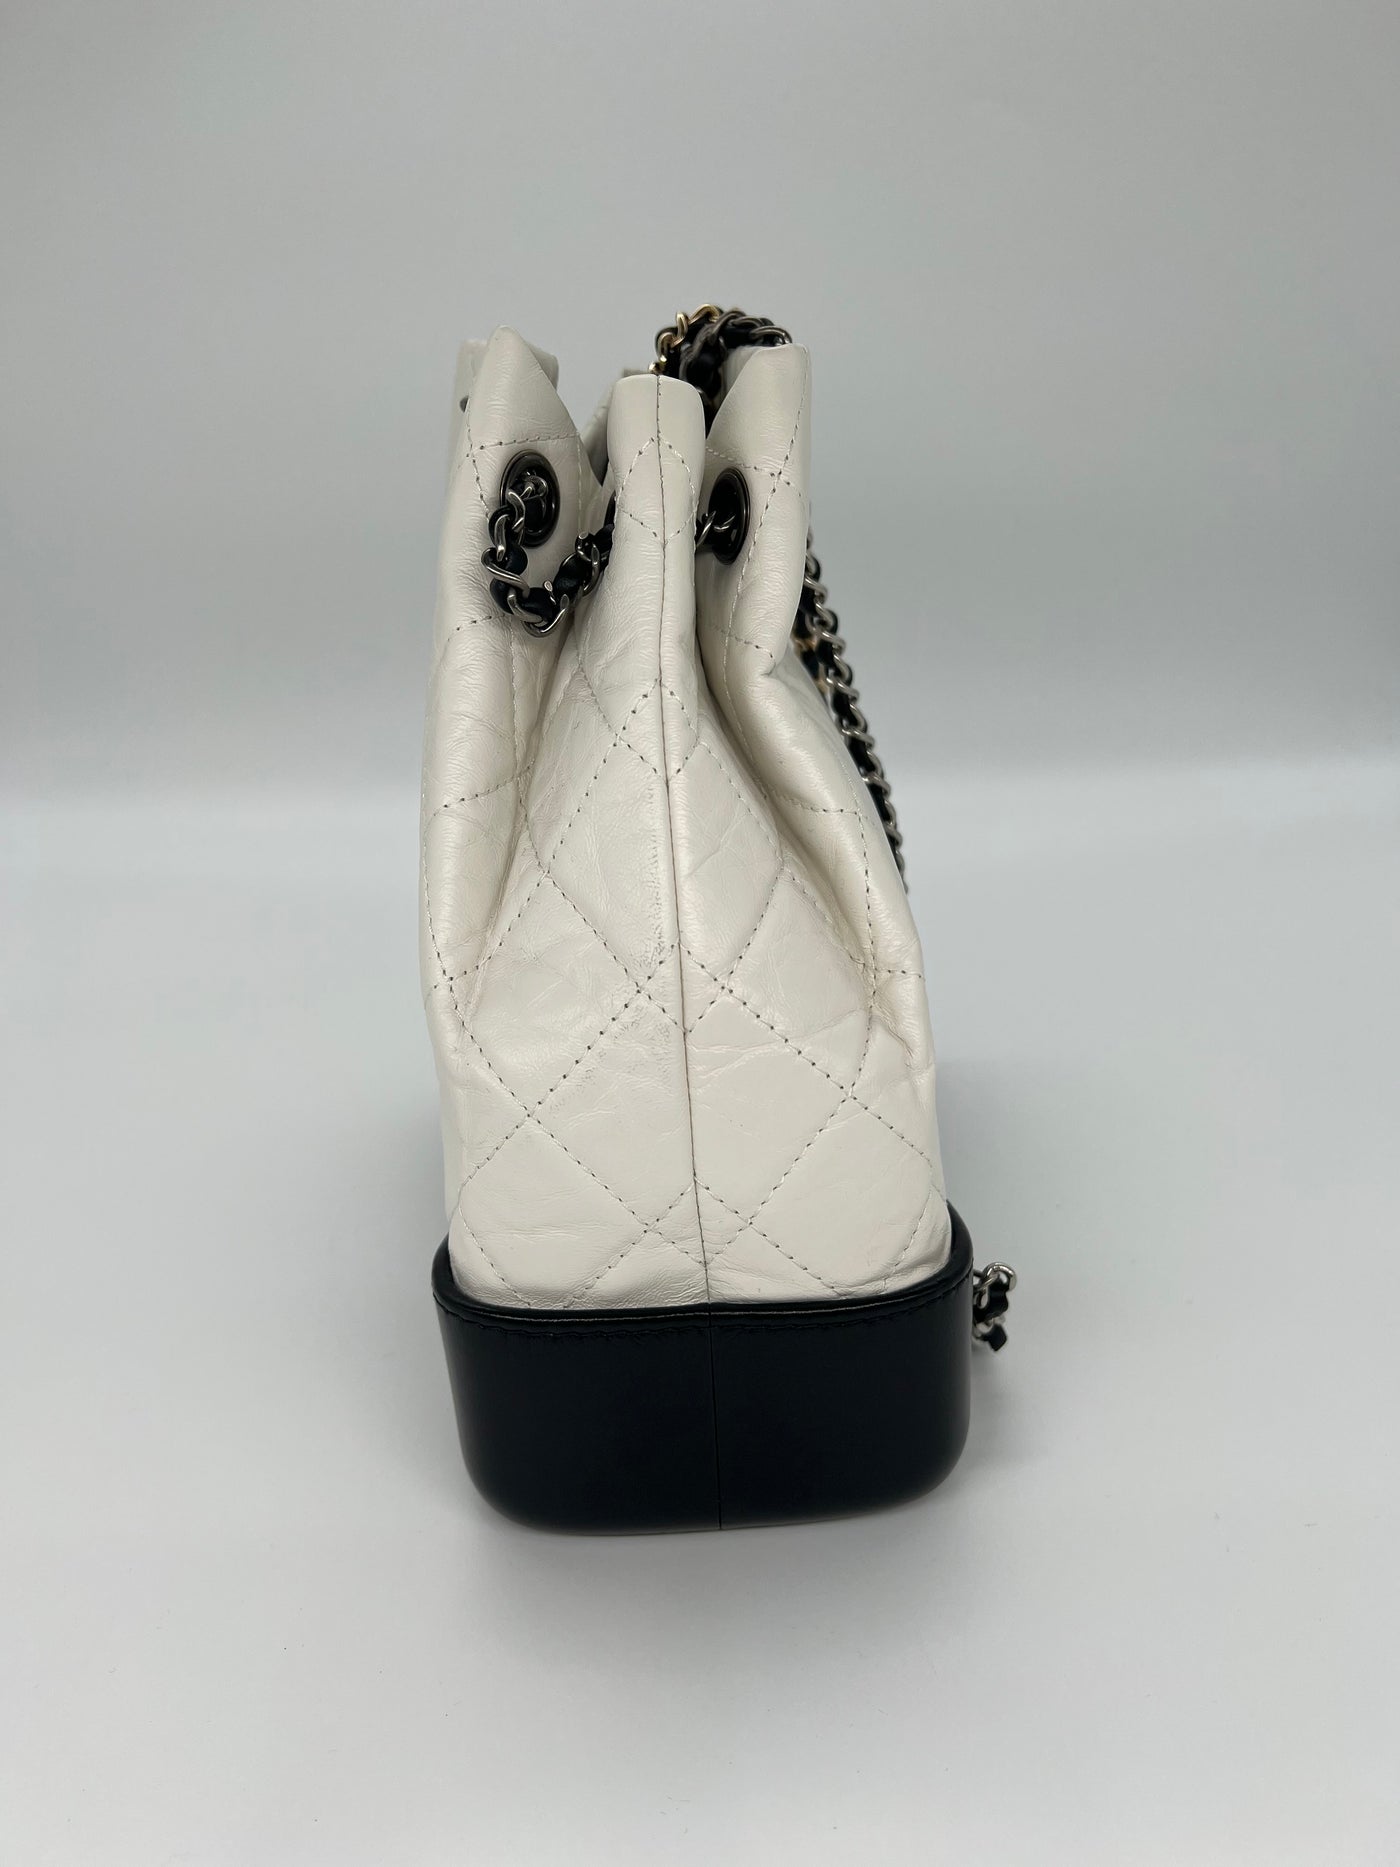 Chanel Gabrielle Backpack White & Black - SOLD